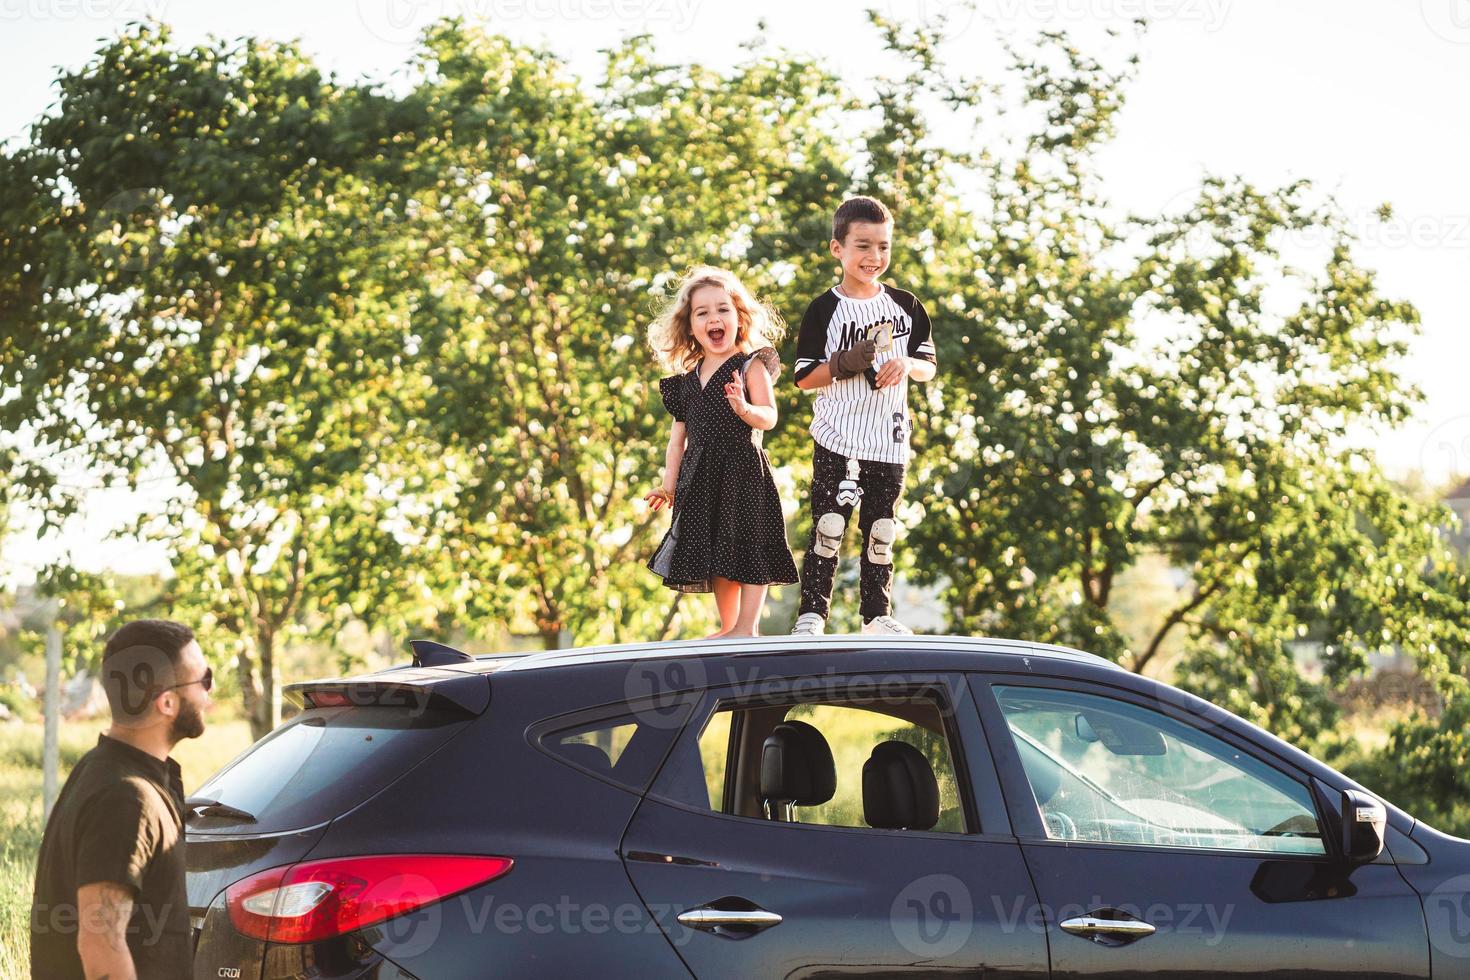 Two children stand on the roof of a car photo